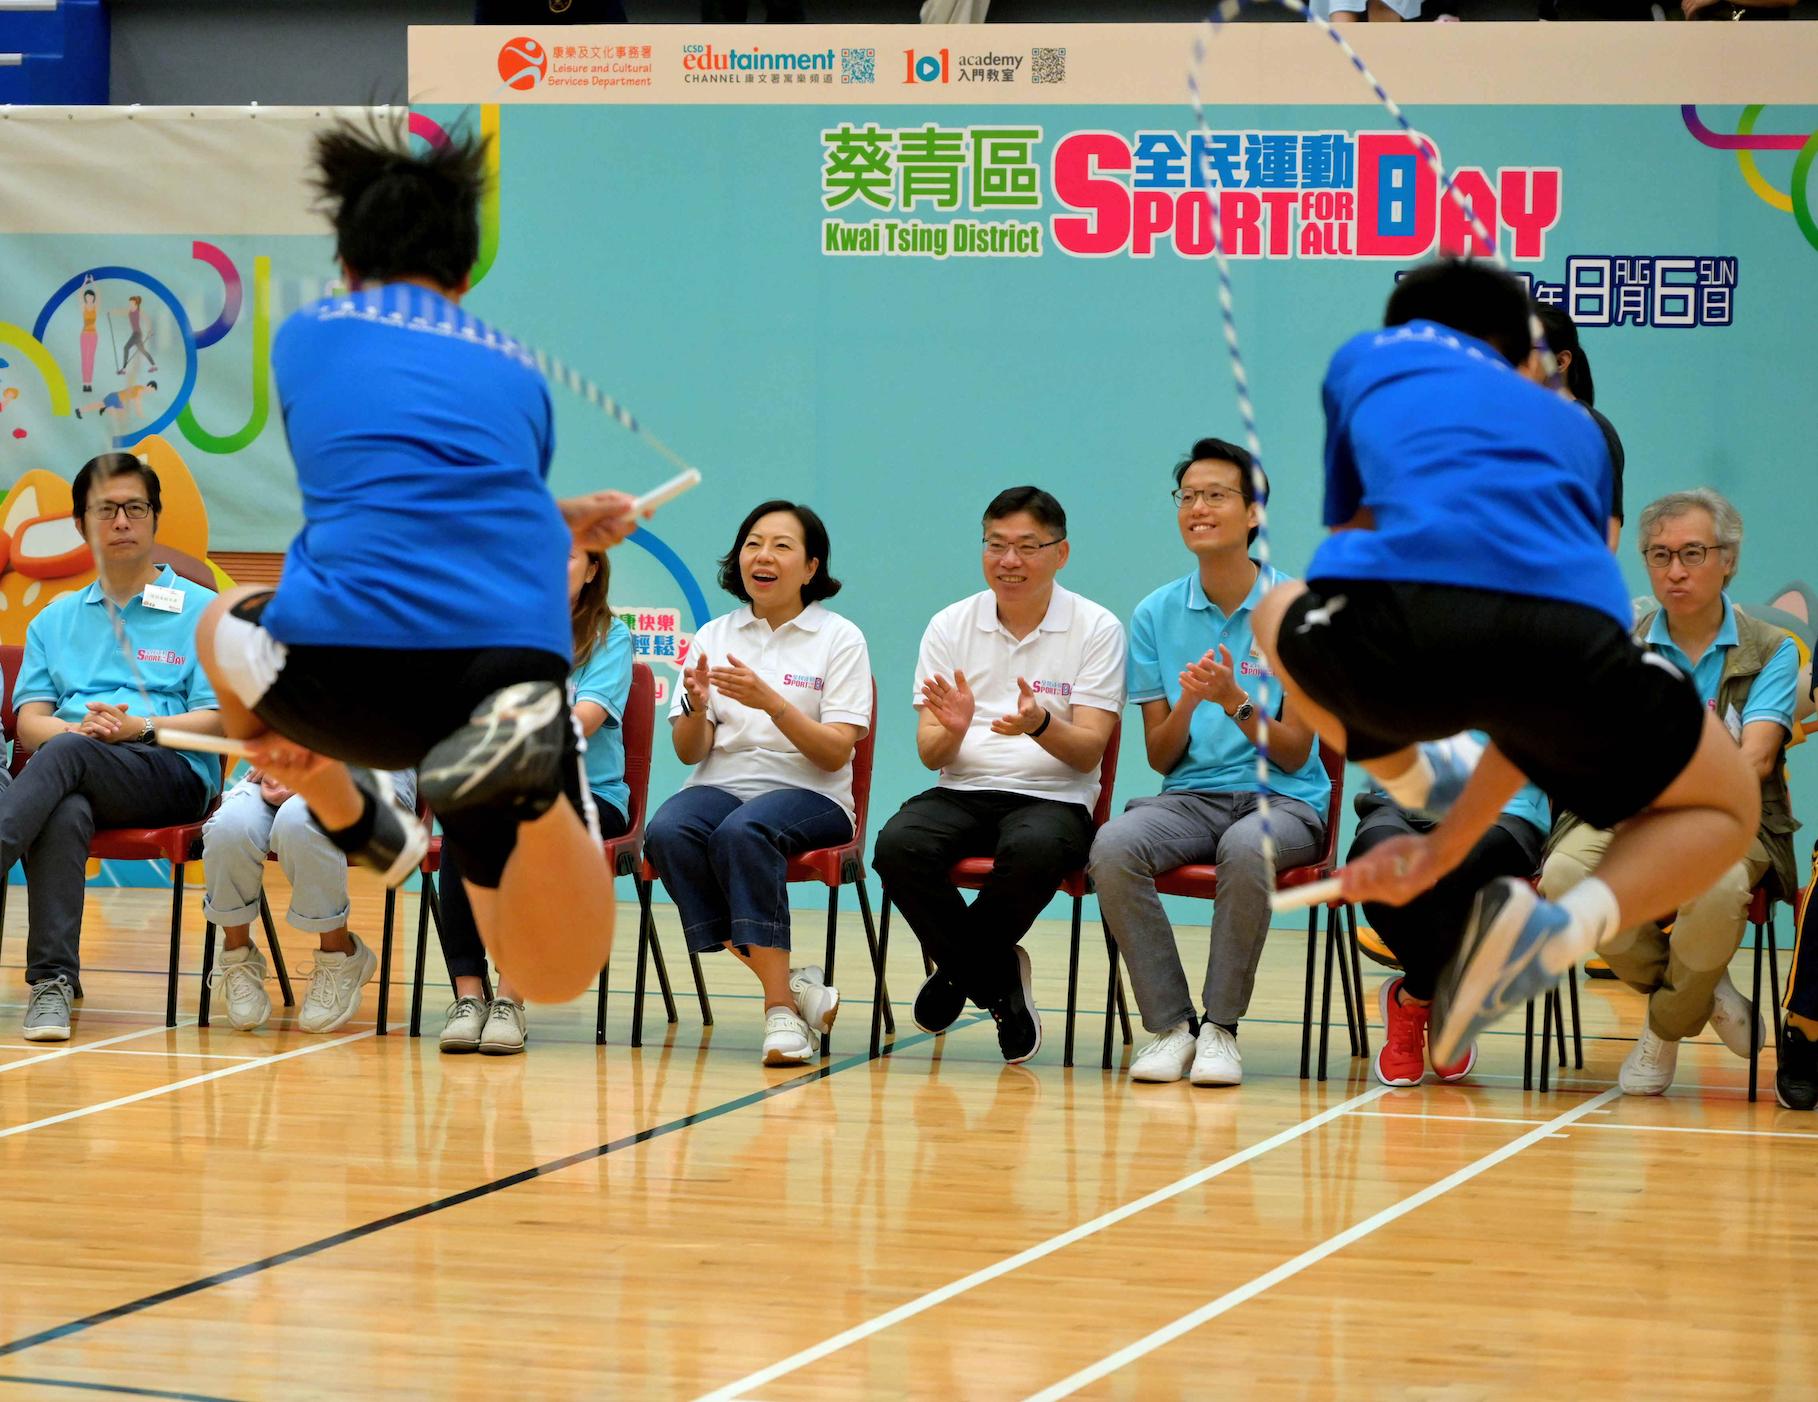 The Secretary for Home and Youth Affairs, Miss Alice Mak, today (August 6) participated in Sport For All Day 2023 activities at Osman Ramju Sadick Memorial Sports Centre to bring the message of "fitness exercise for wellness". Photo shows Miss Mak (fourth right) and the Secretary for Transport and Logistics, Mr Lam Sai-hung (third right) watching rope skipping demonstration.

